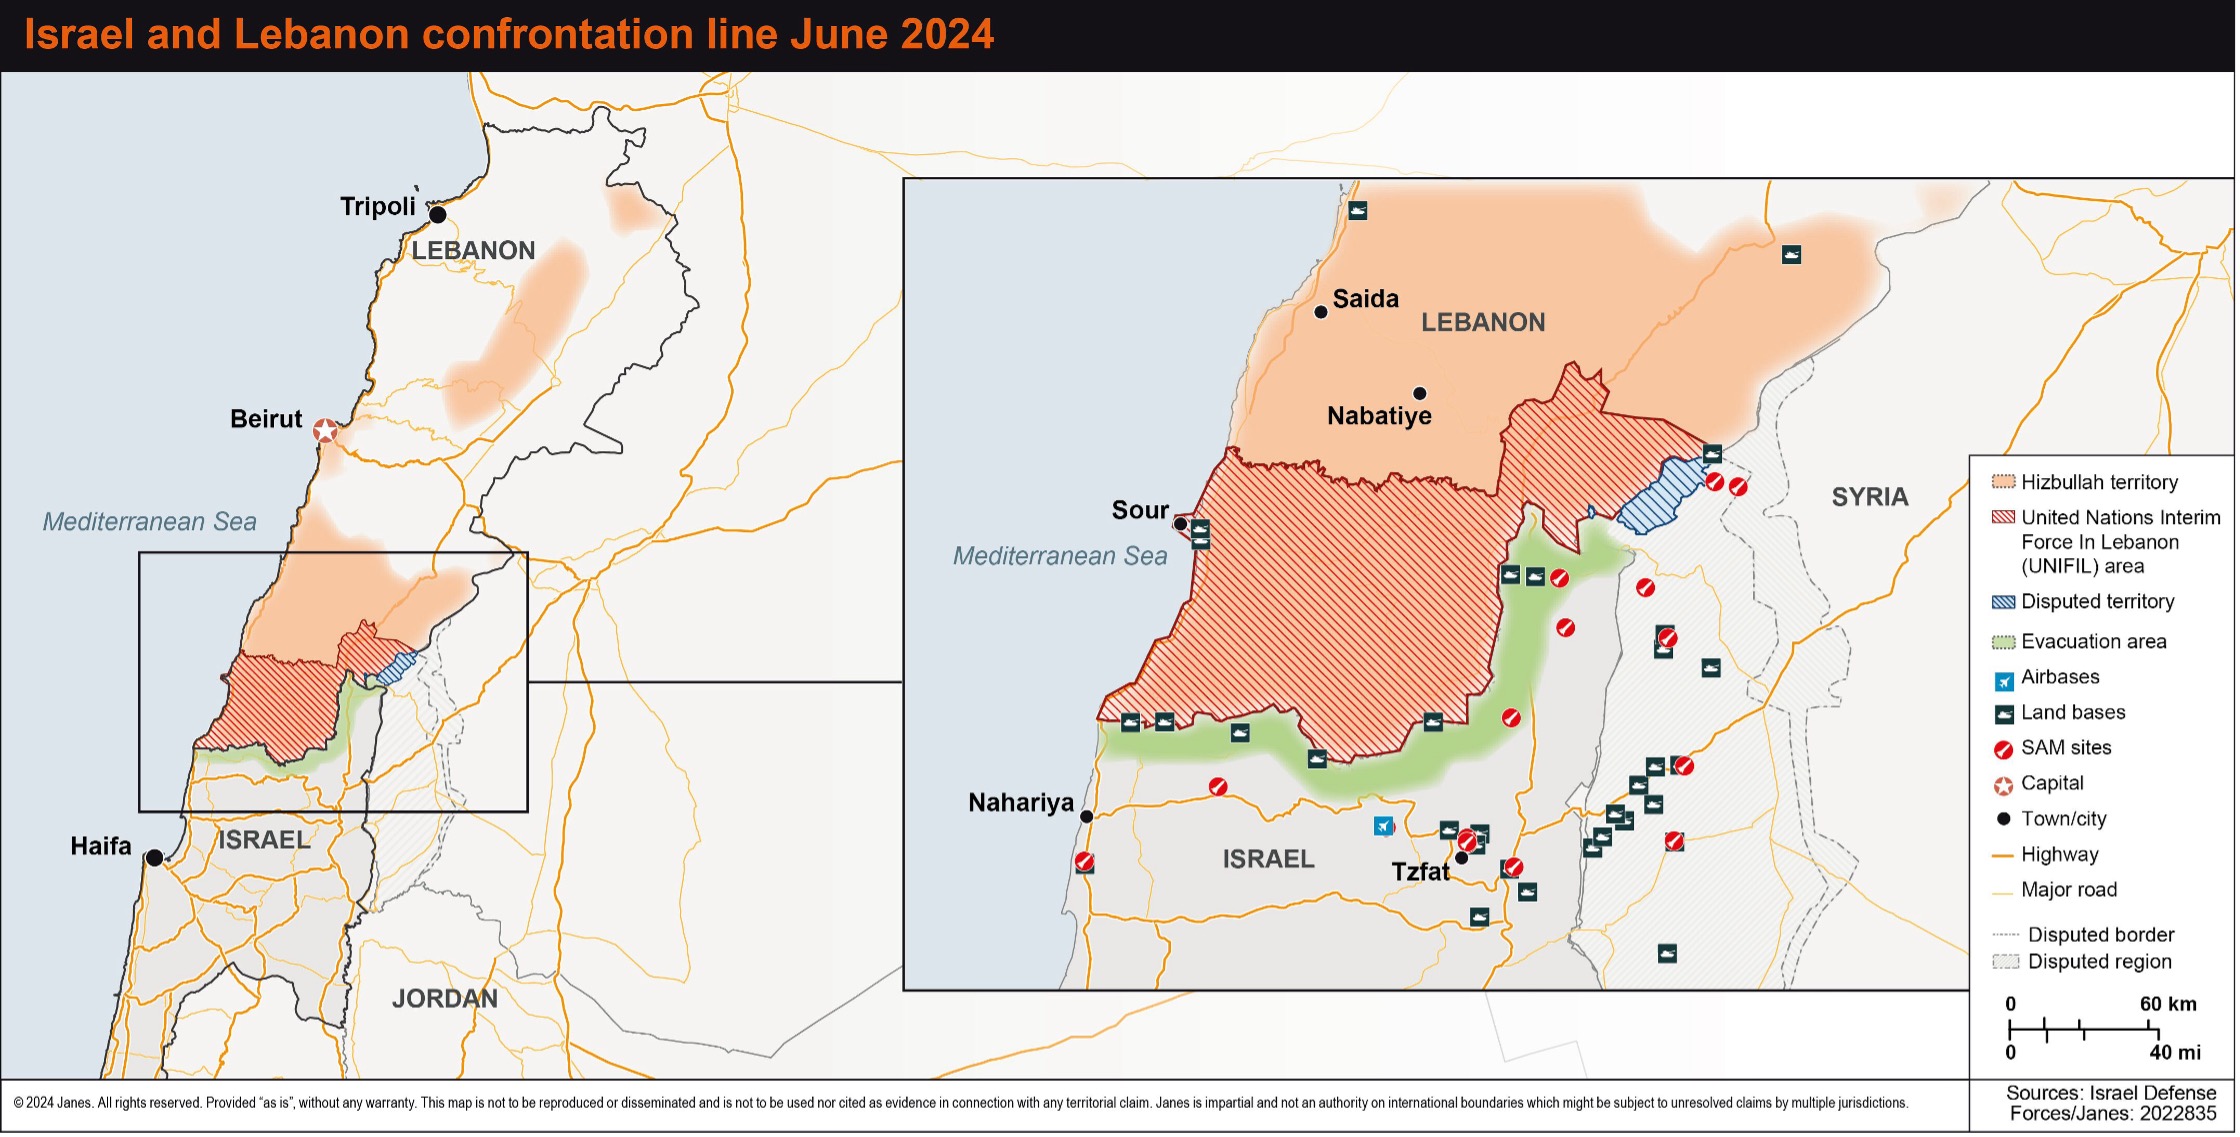 Israel and Lebanon confrontation line June 2024